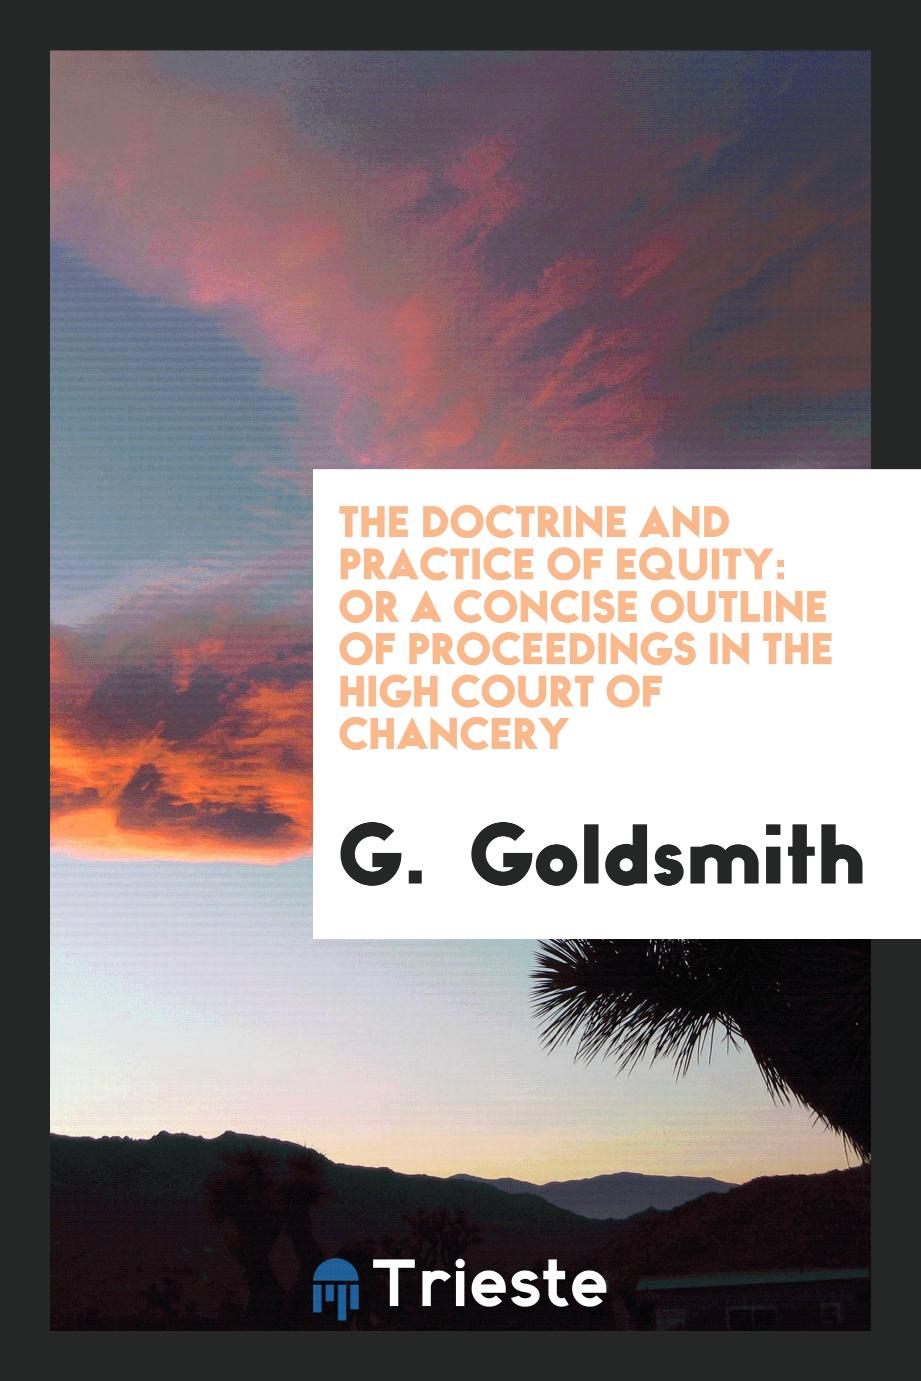 The Doctrine and Practice of Equity: Or A Concise Outline of Proceedings in the High Court of Chancery